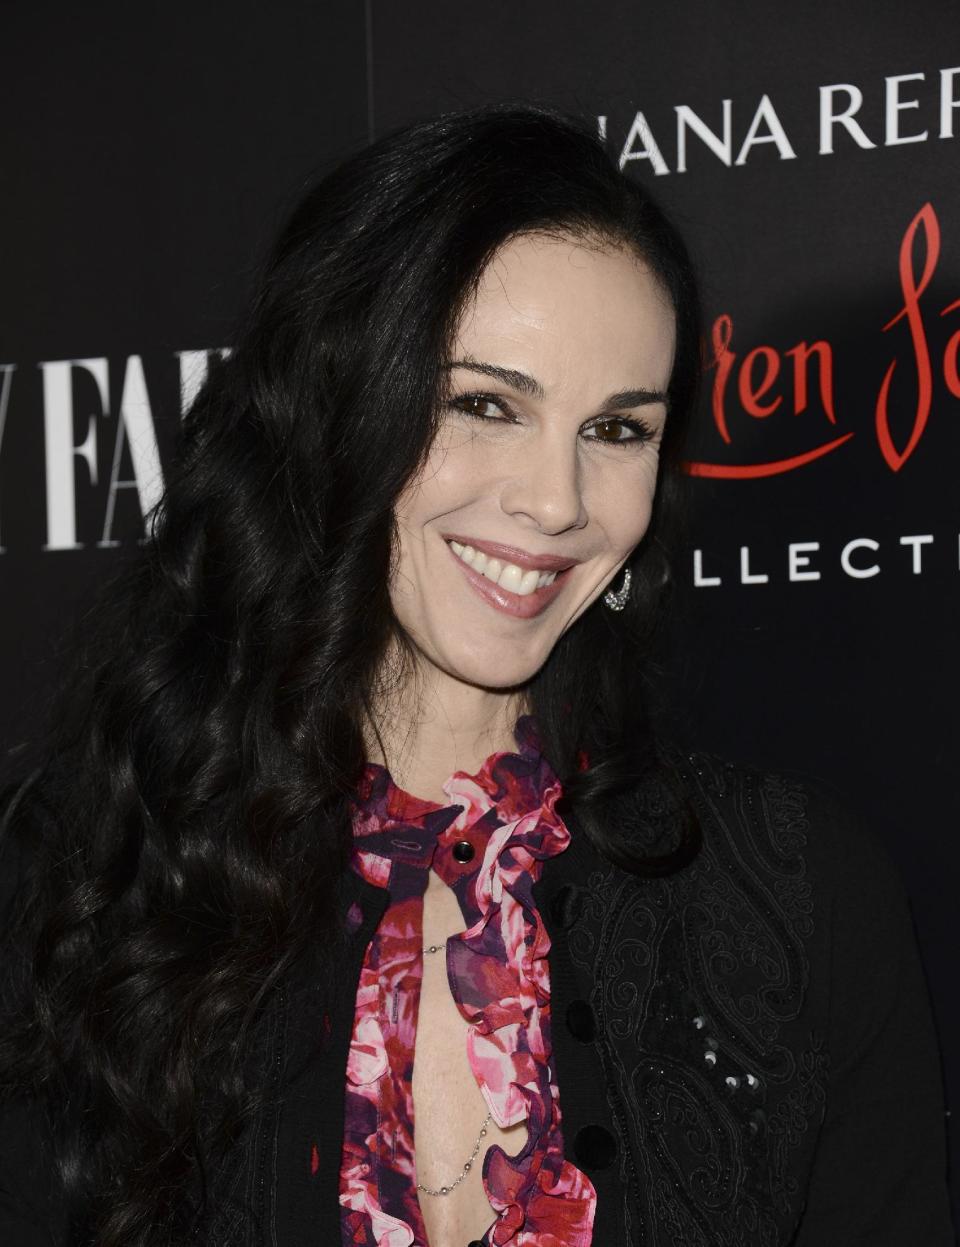 FILE - This Nov. 19, 2013 file photo shows fashion designer L'Wren Scott at the Banana Republic L'Wren Scott Collection launch party at the Chateau Marmont in West Hollywood, Calif. Scott, a fashion designer, was found dead Monday, March 17, 2014, in Manhattan of a possible suicide. (Photo by Dan Steinberg/Invision/AP, File)